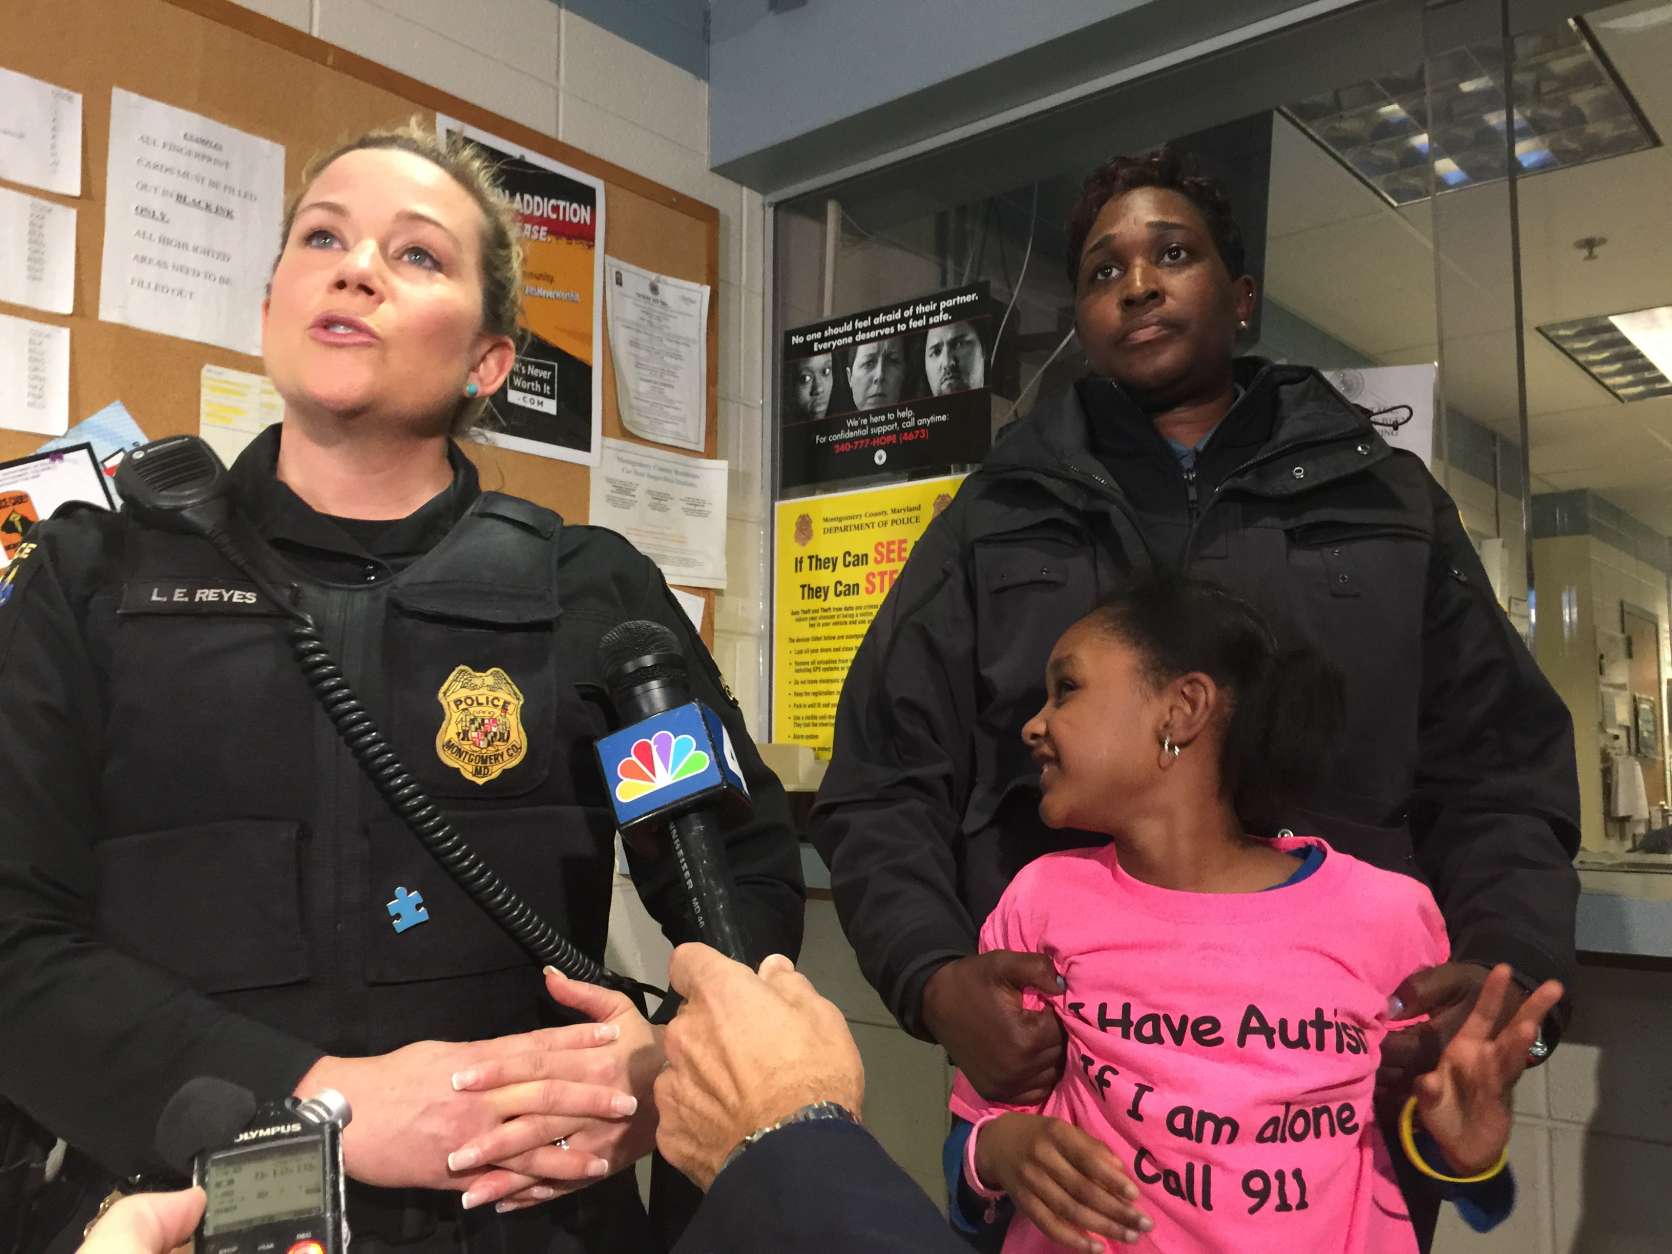 Montgomery County Police Officer Laurie Reyes is the Department's Autism and Intellectual Developmental Disabilities outreach officer. (WTOP/Kristi King)